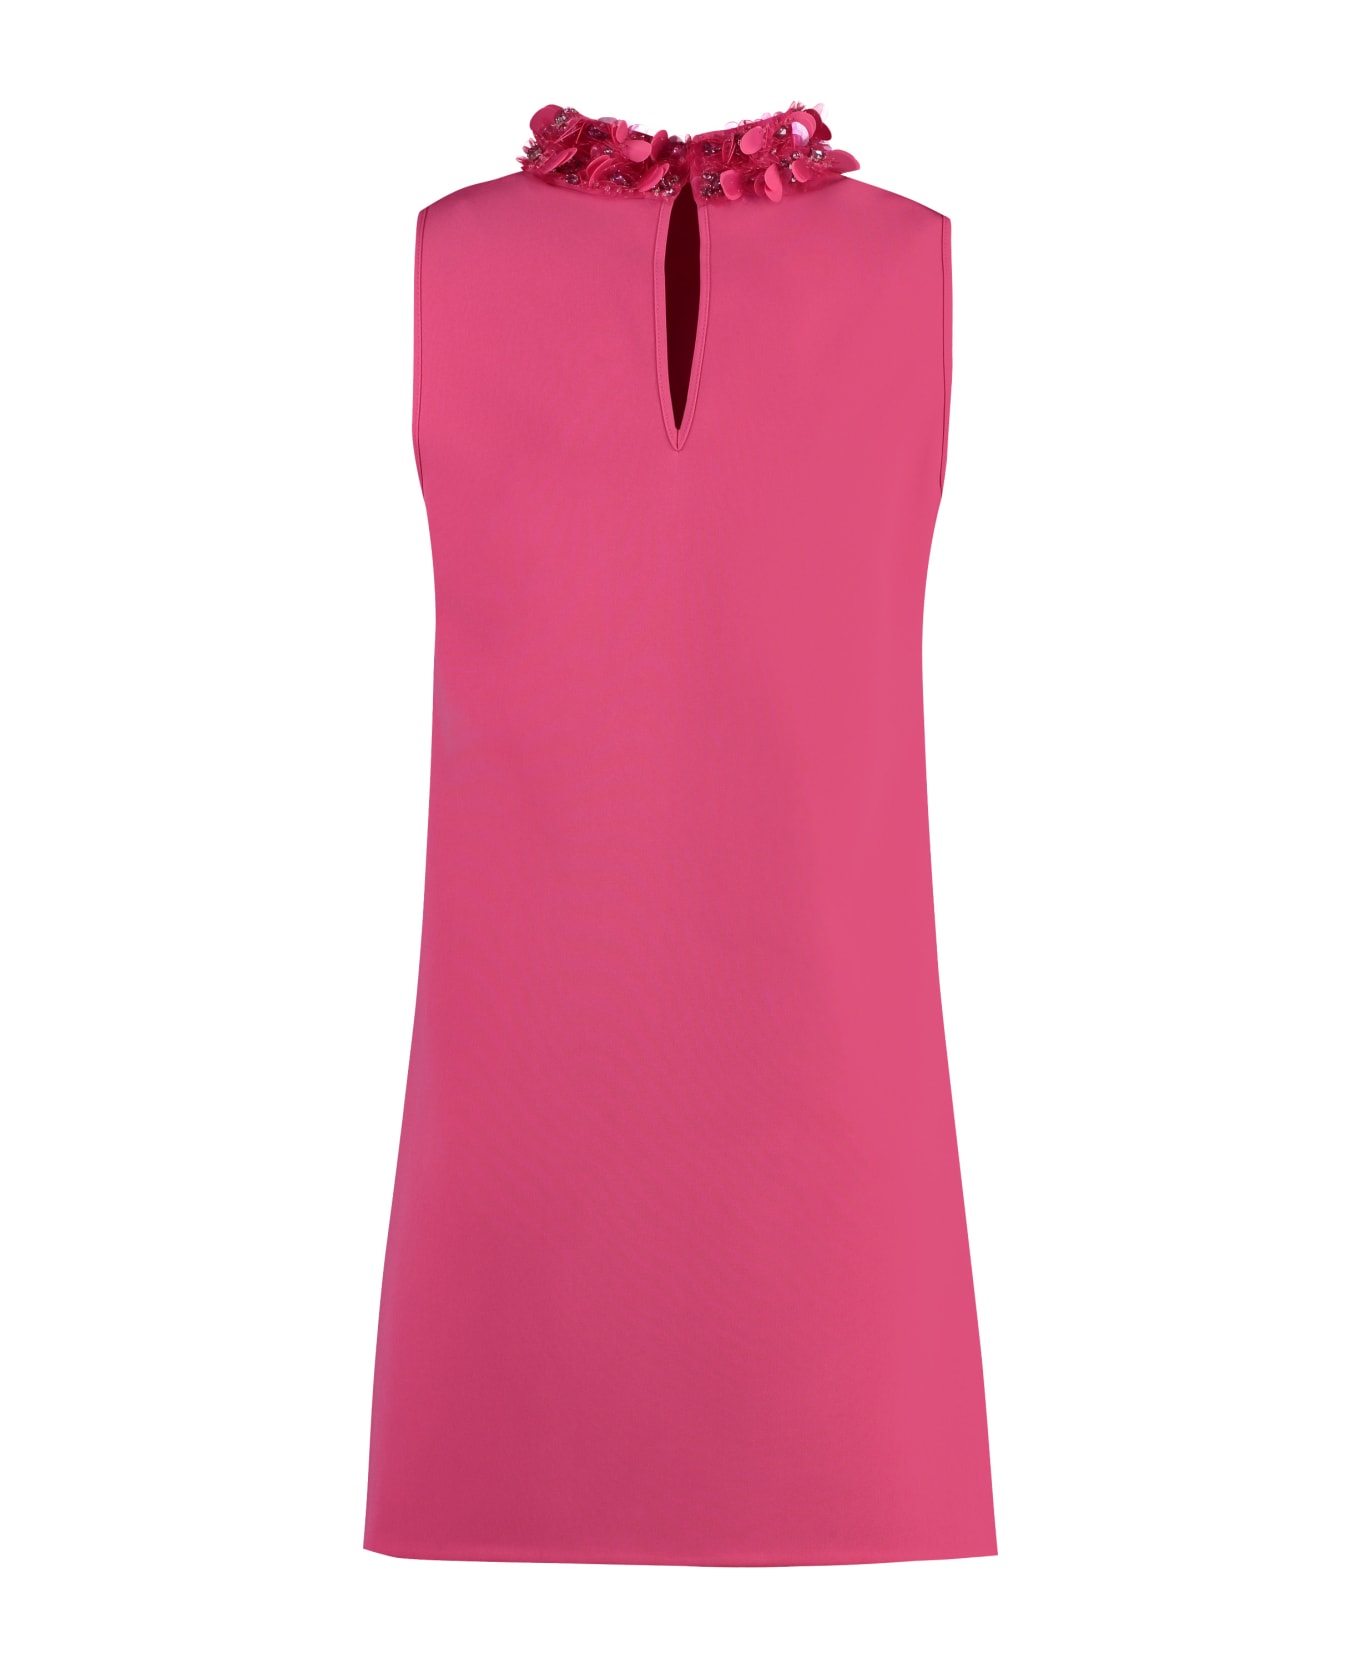 Parosh Dress With Floral Applications - Bubble Pink